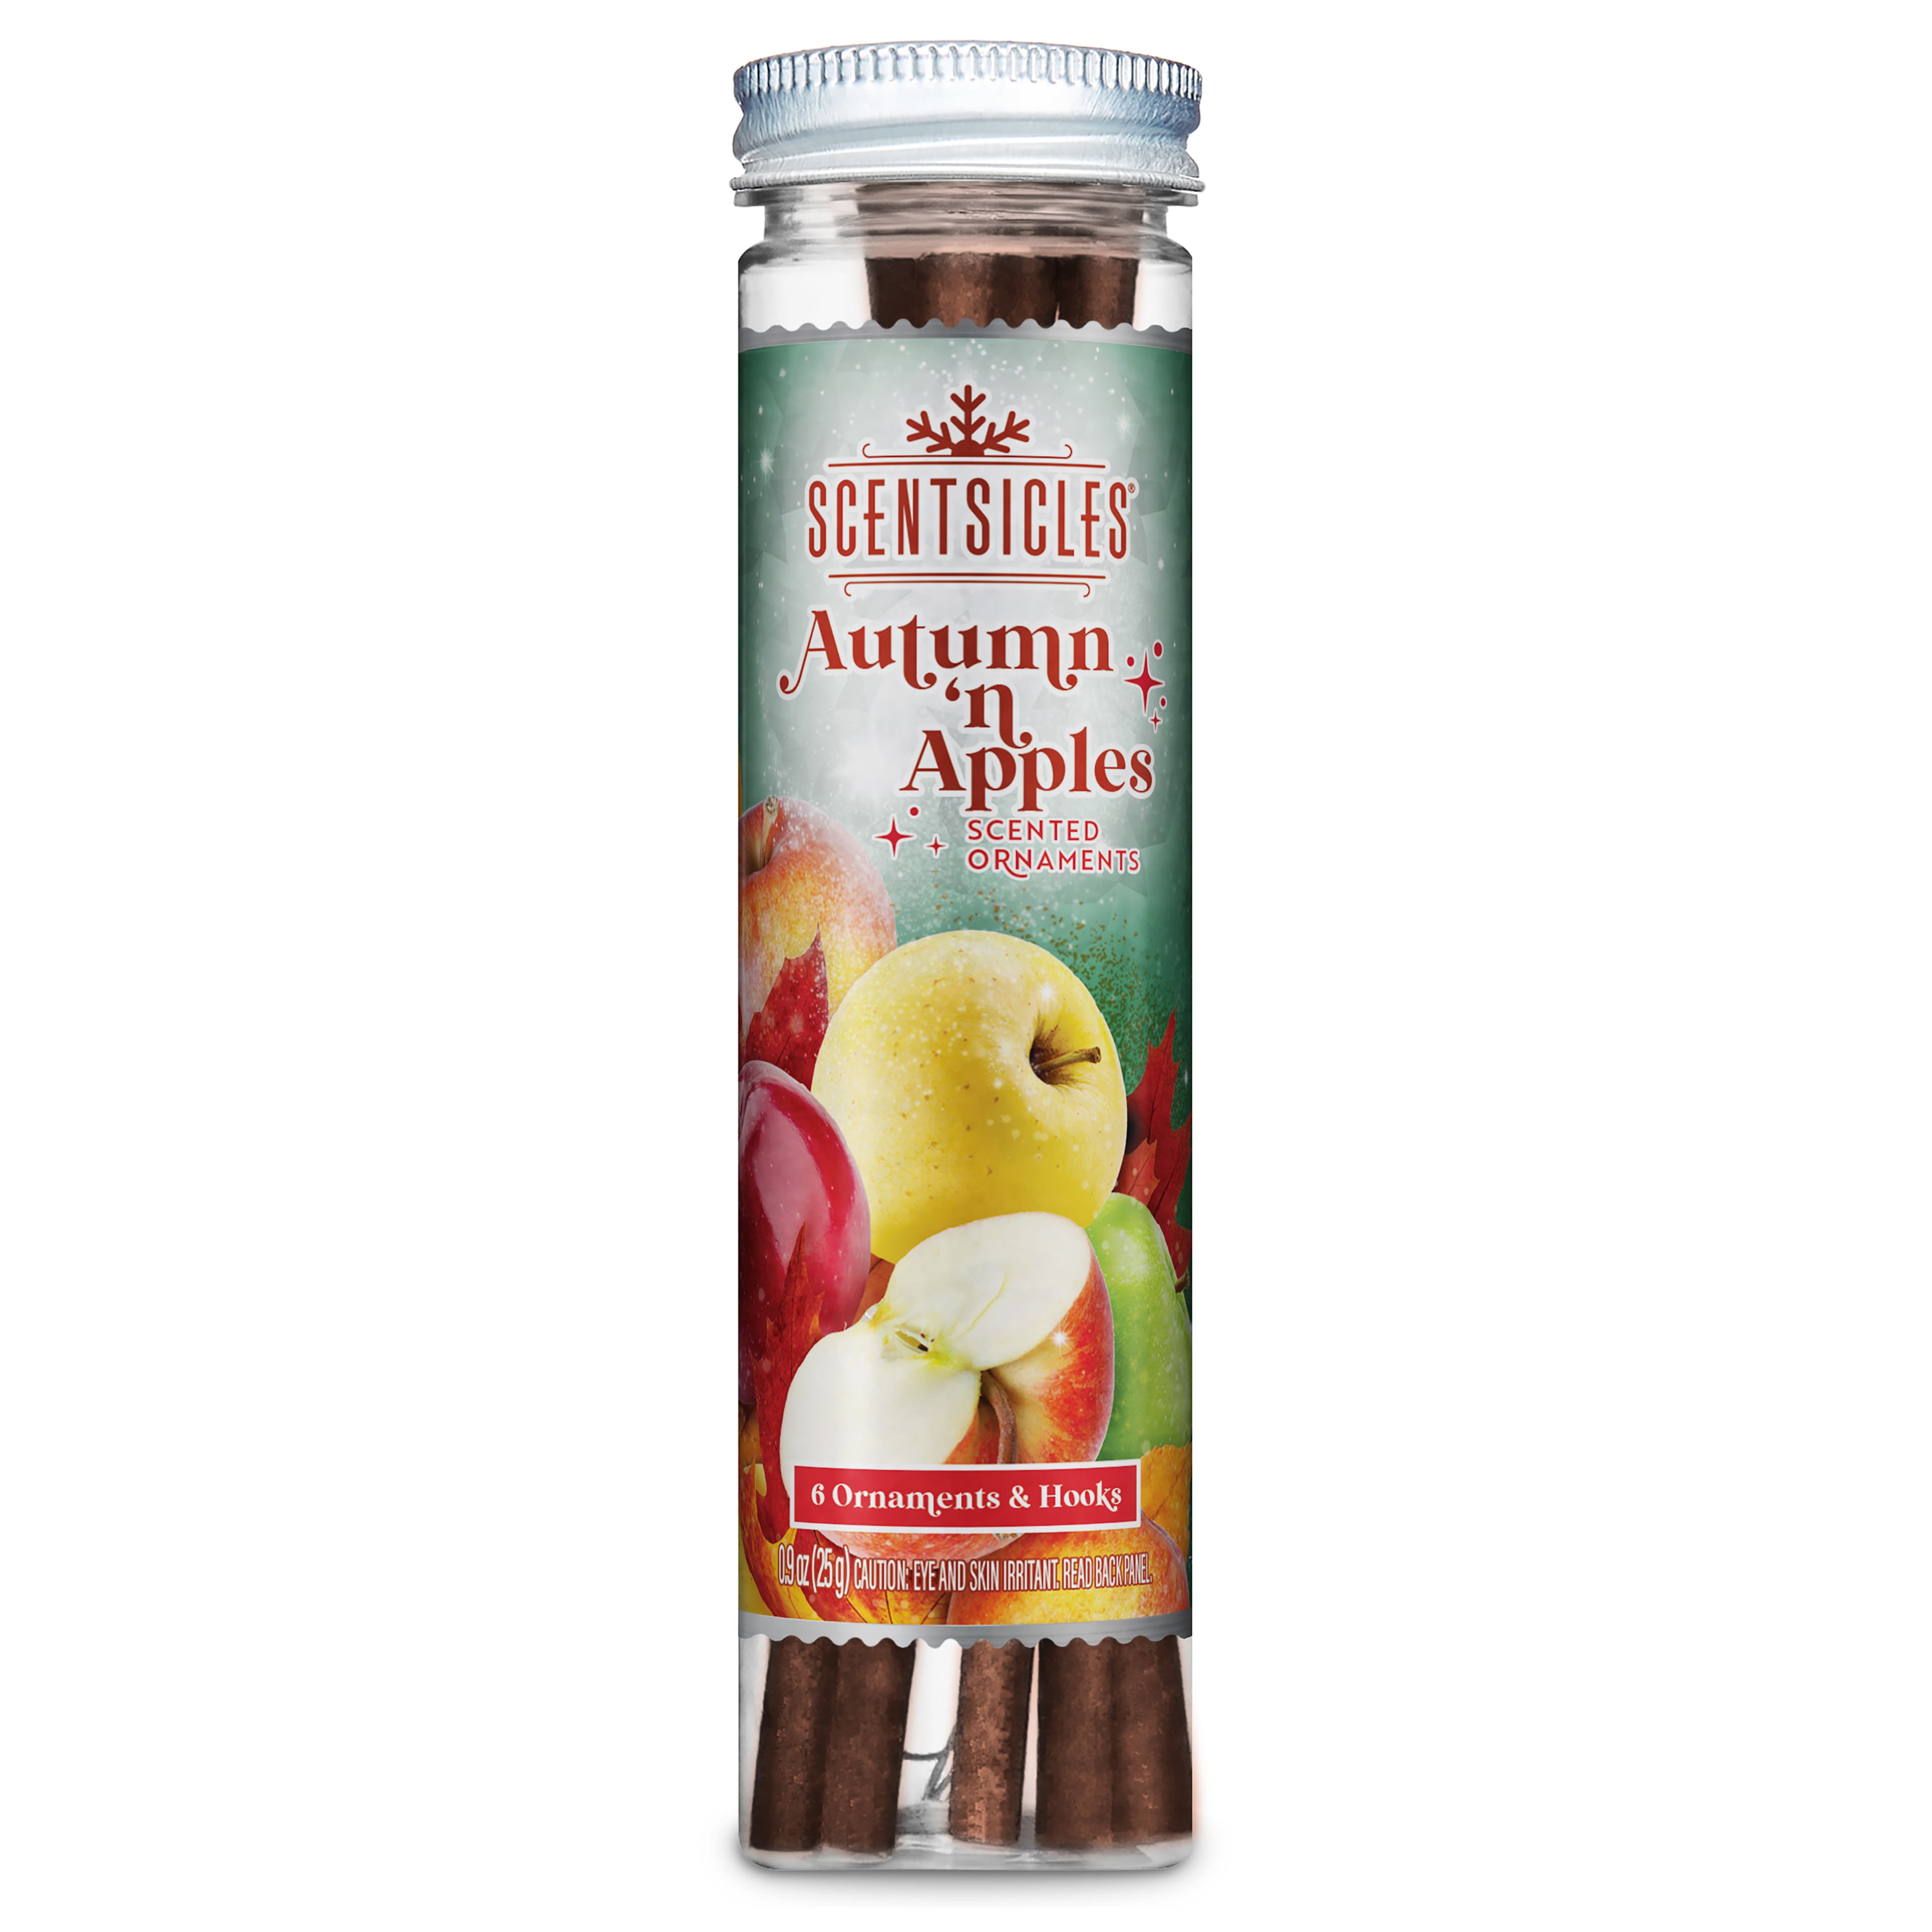 Scentsicles&#xAE; Autumn &#x27;n Apples Scented Ornament Sticks, 6ct.